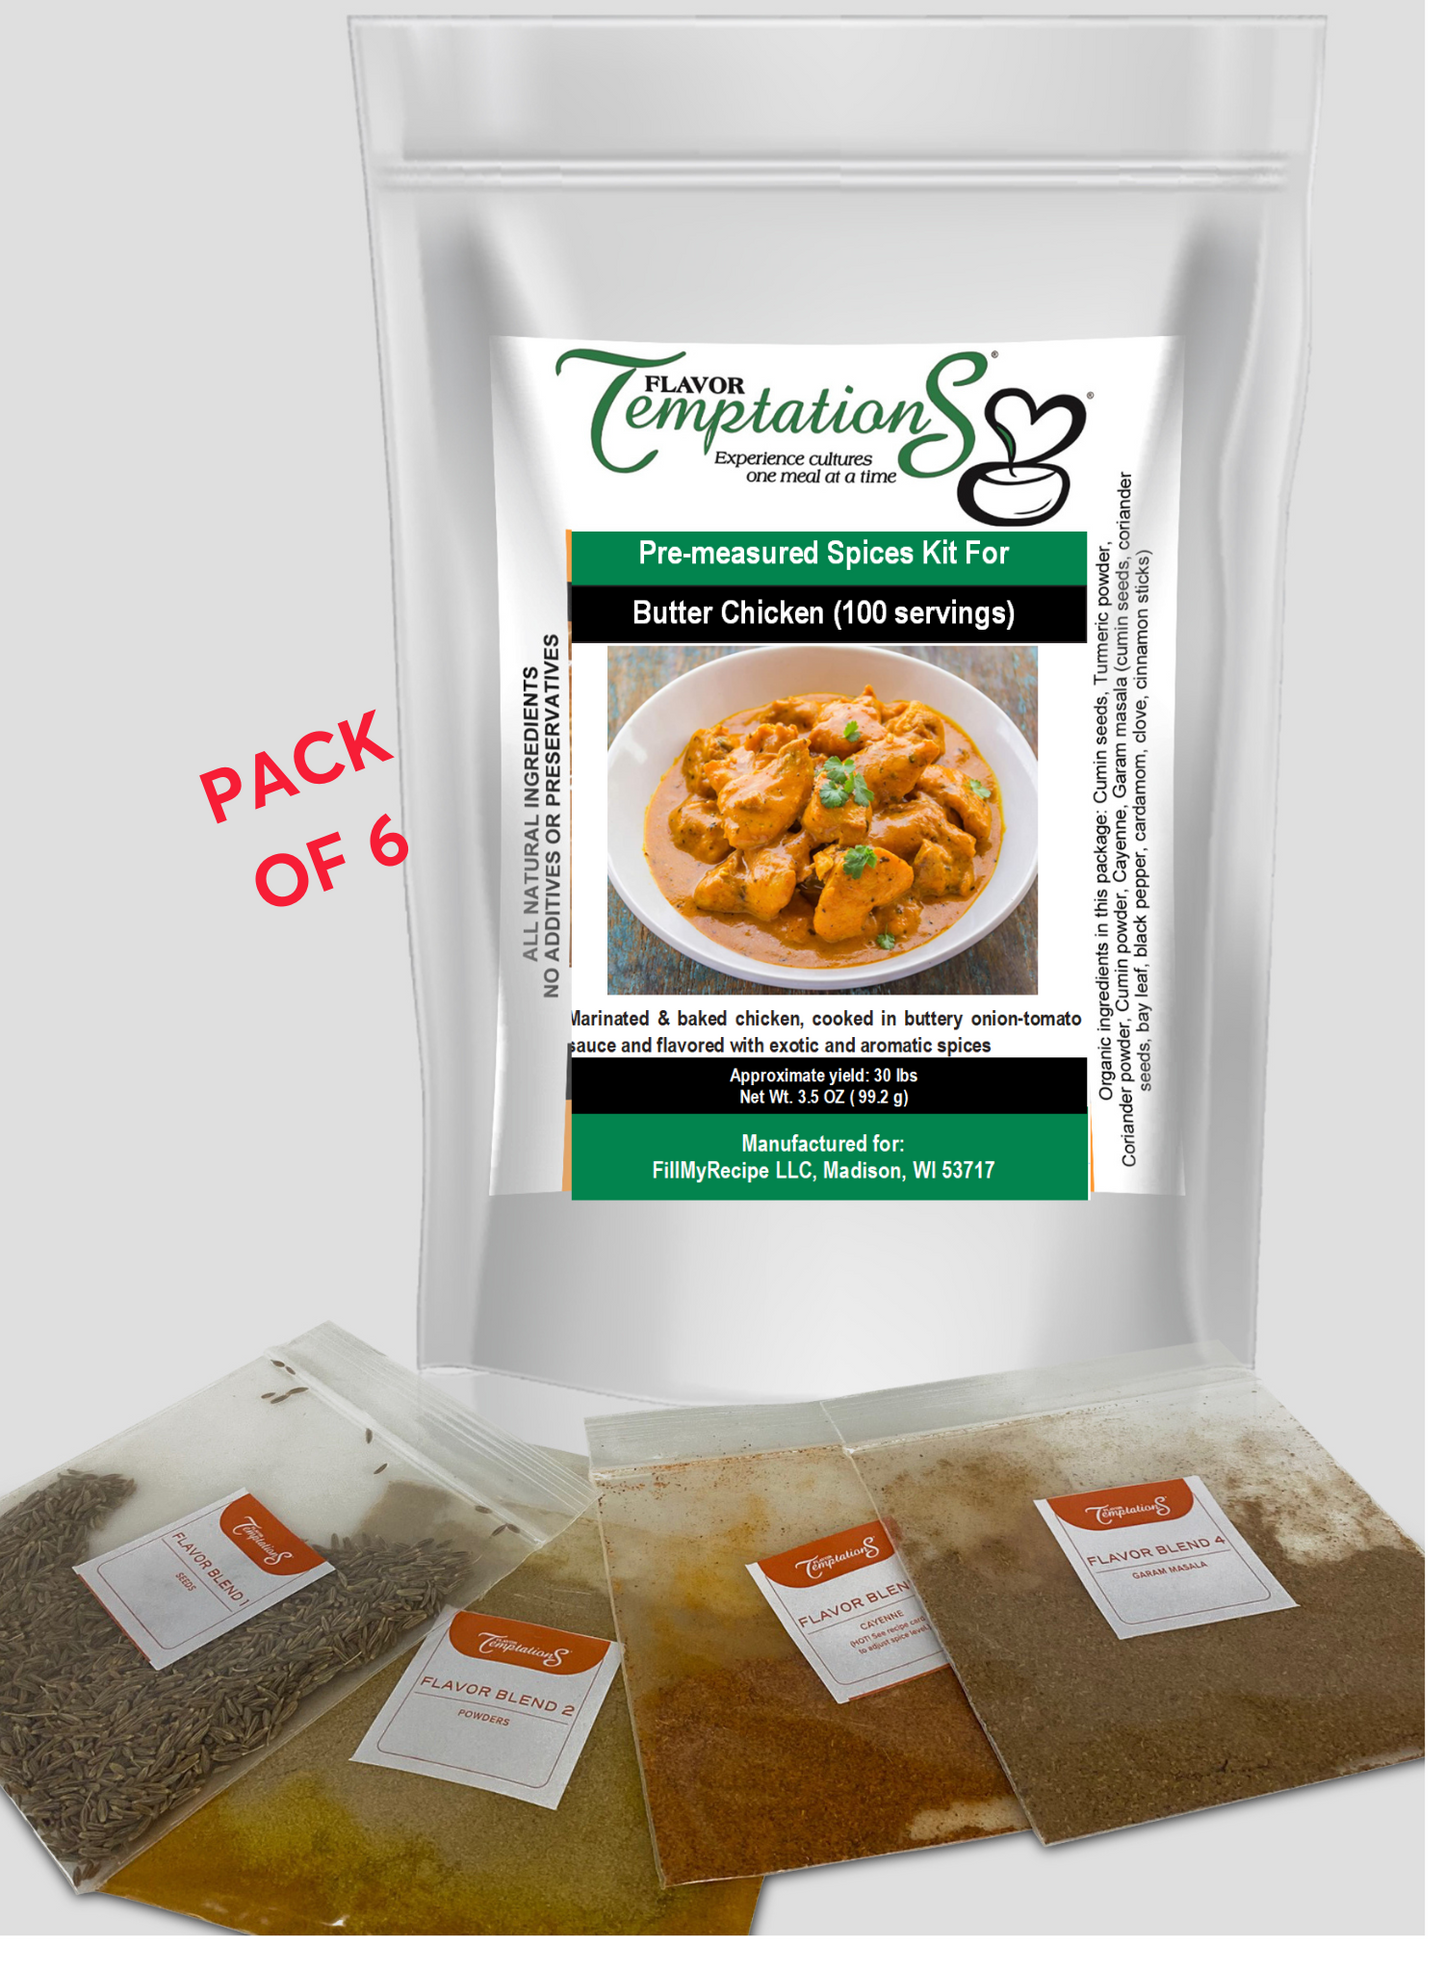 FOOD SERVICE Butter Chicken Spice Kit